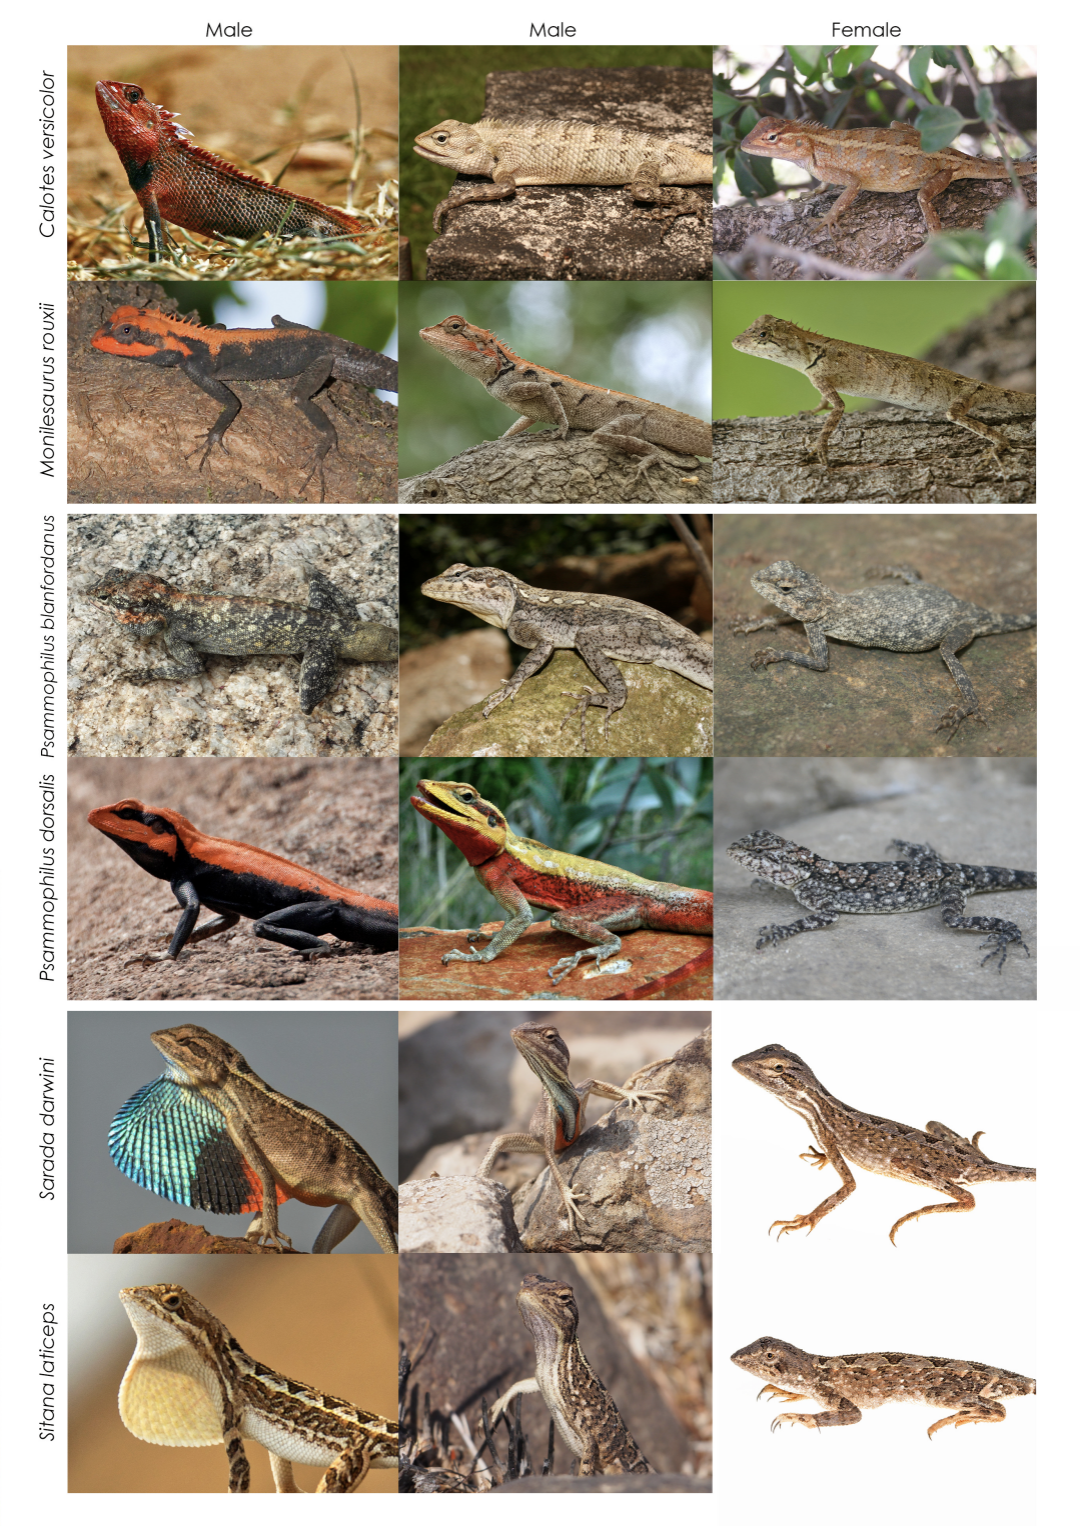 The image shows the wide variation of colour across males and females of the six species studied in this research. Credits: Ruchira Somaweera (all C. versicolor images, P. dorsalis male), Chandra Mouli (P. blanfordanus male and female, P. dorsalis female), Pranav Joshi (M. rouxii males), Subham Soni (M. rouxii female), Swapnil Pawar (S. darwini and S. laticeps males), Amod Zambre (S. darwini and S. laticeps females) (taken from Batabyal et al.)